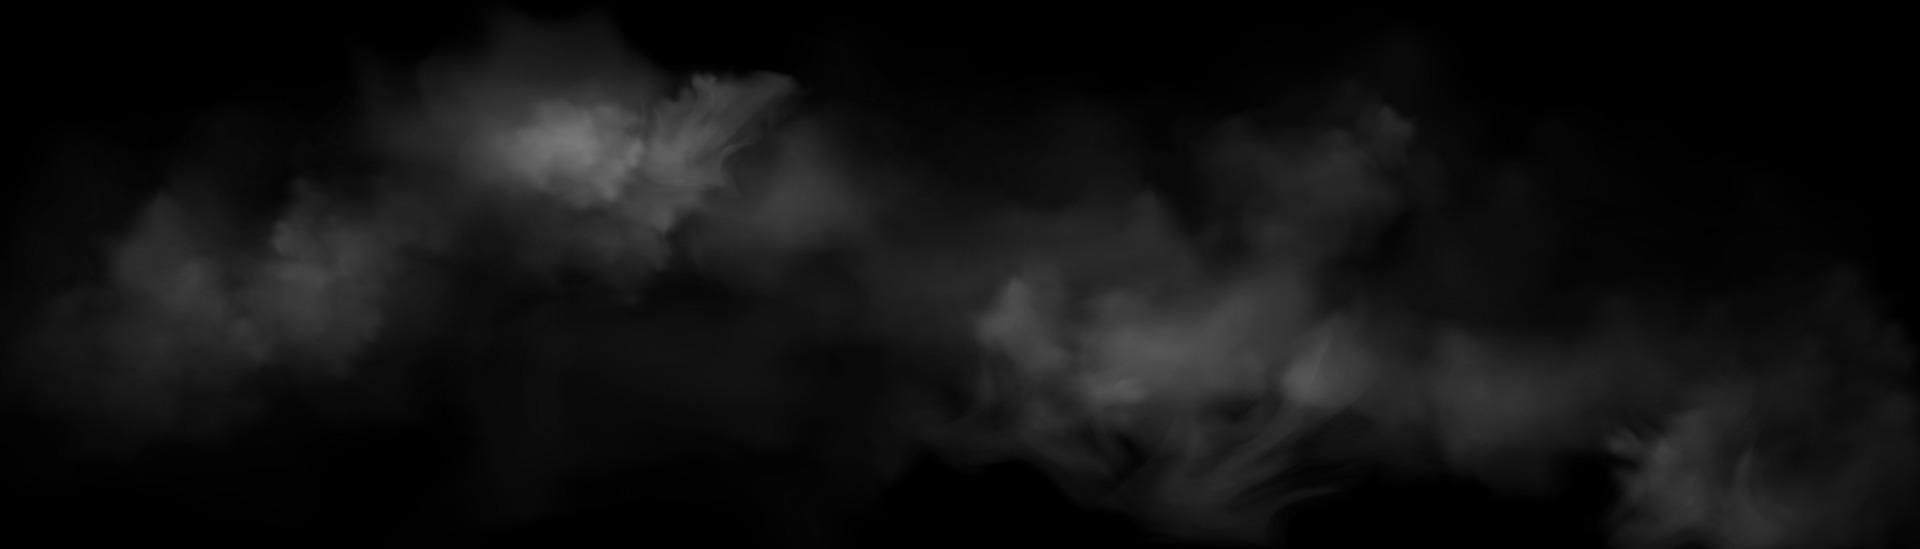 Smoke, fog, white clouds on black background vector